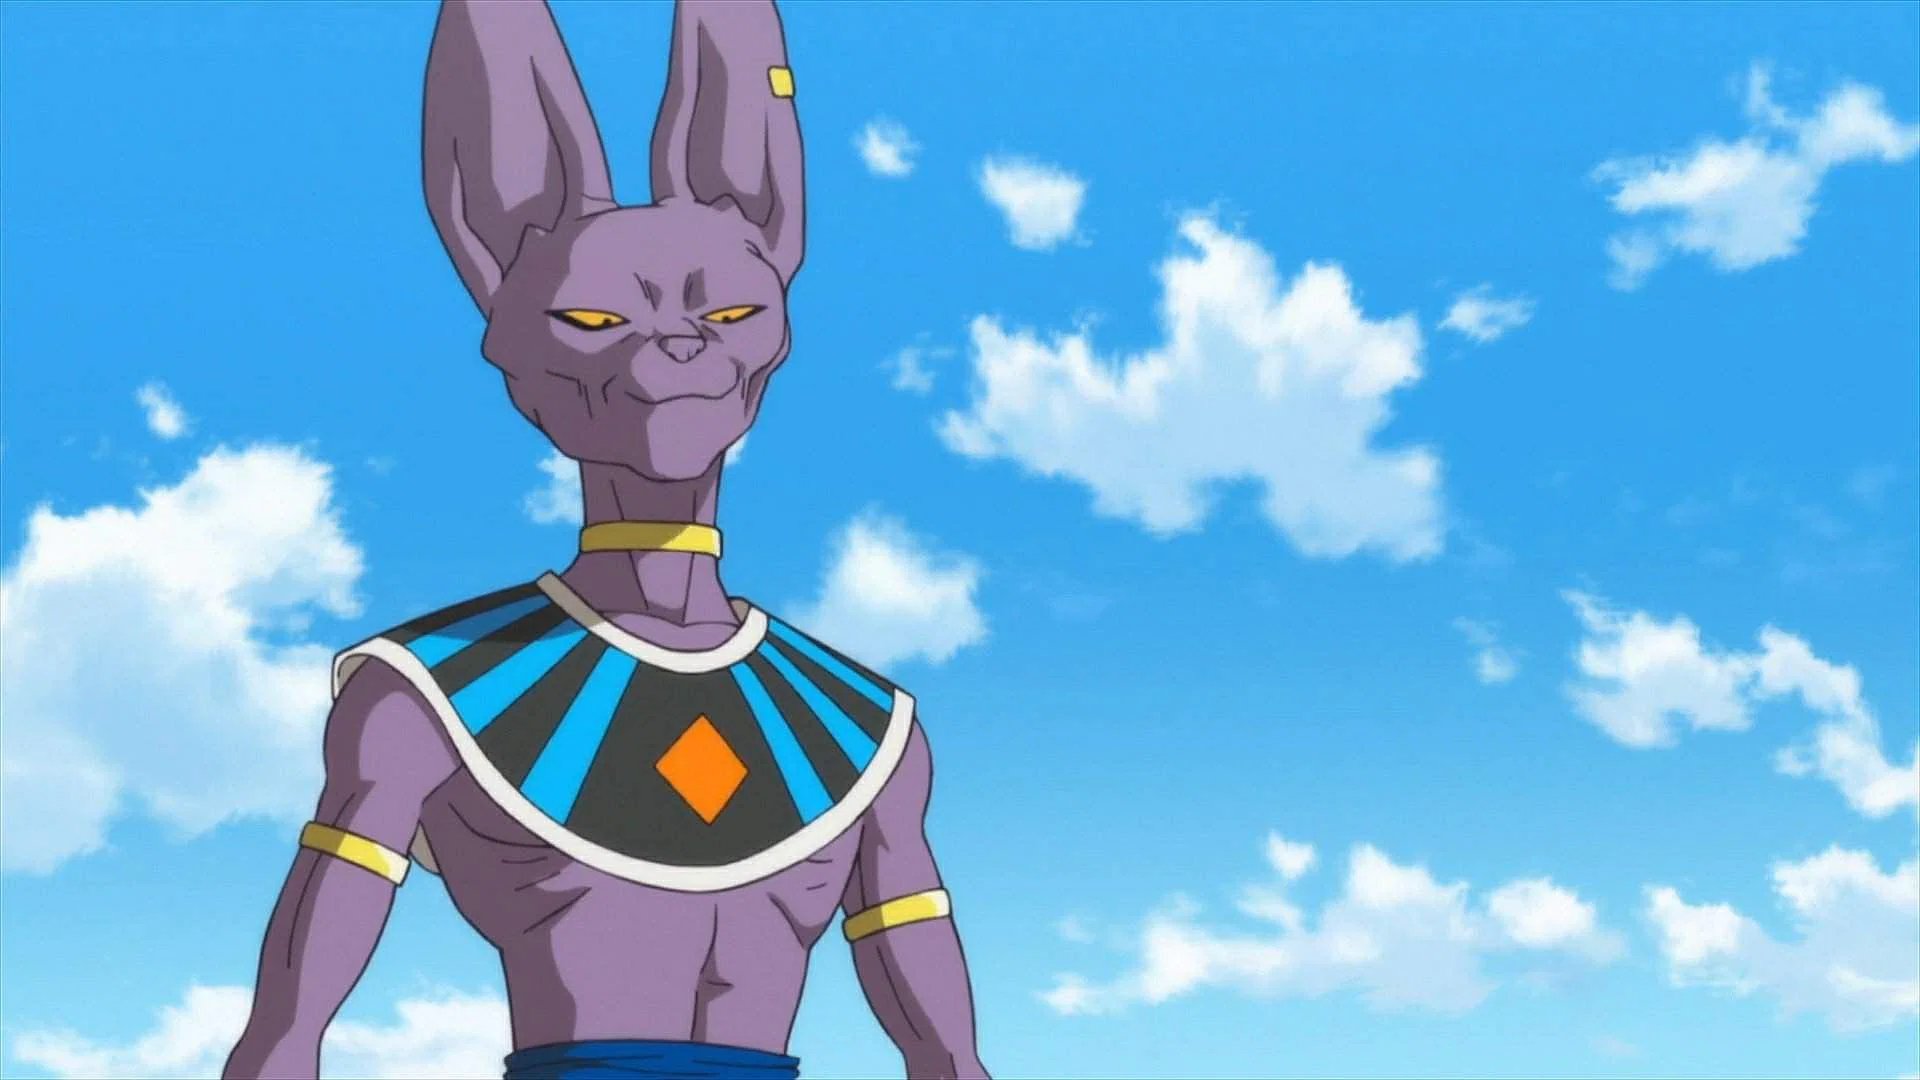 42. Beerus when he sees Vegeta cranking 90s in front of him after training ...